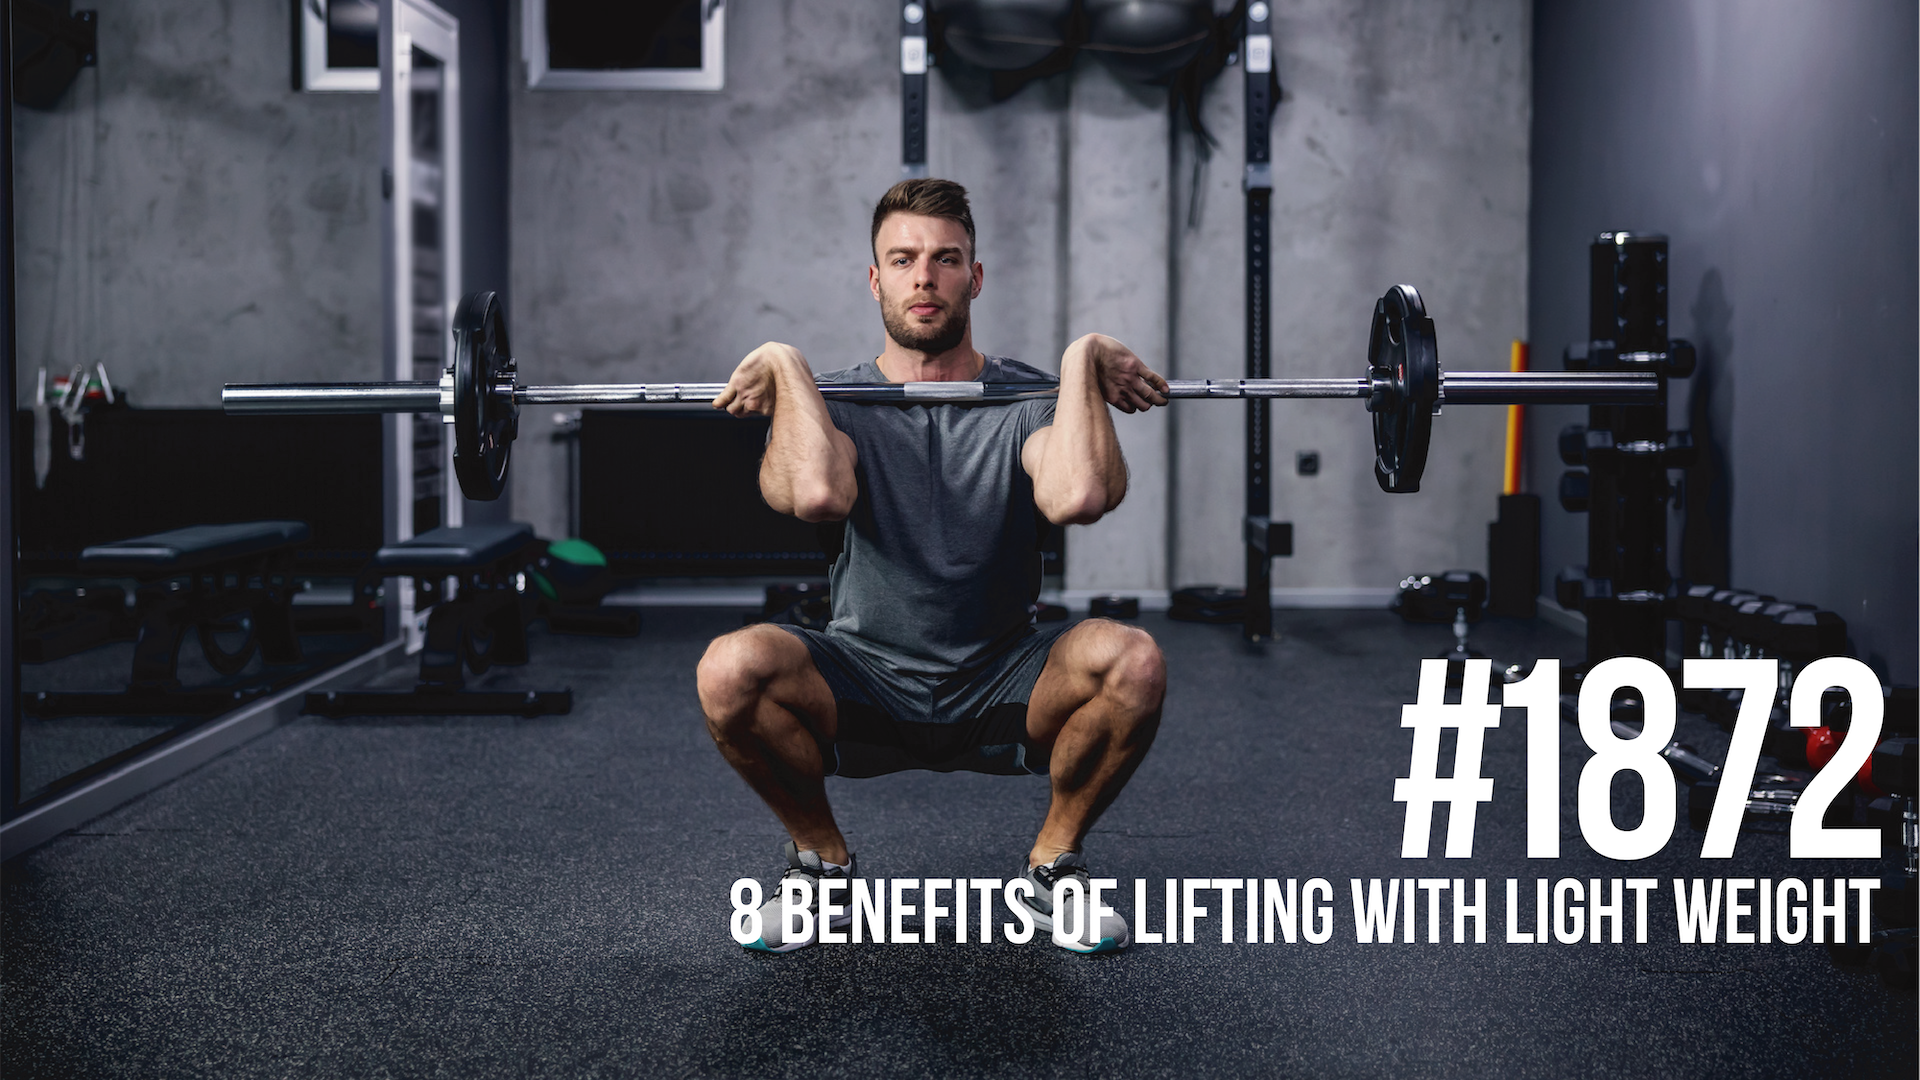 1872: Eight Benefits of Lifting With Light Weight